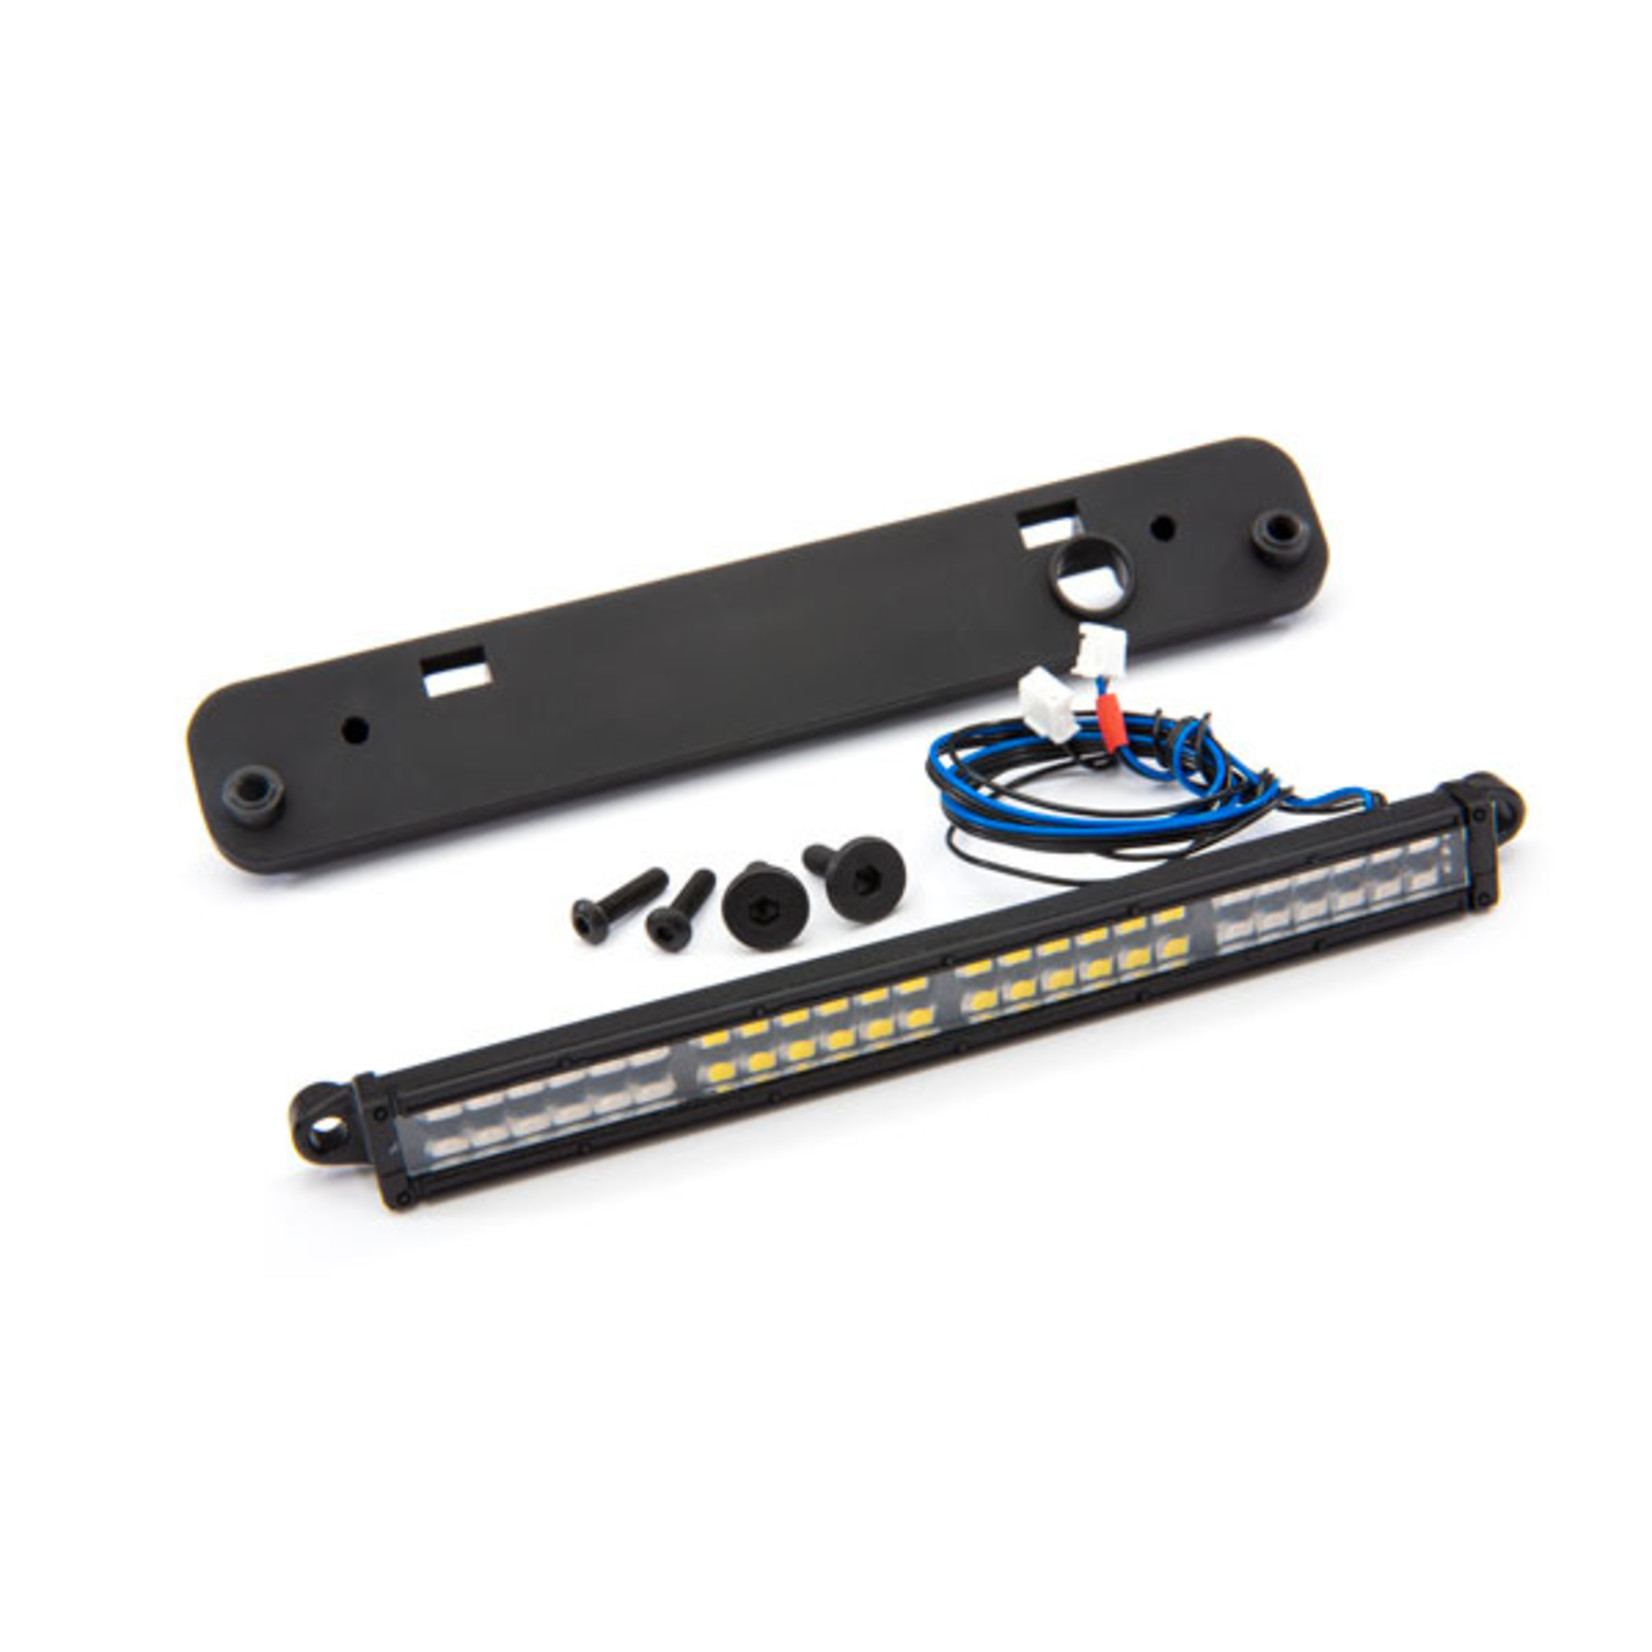 Traxxas 7883 - LED light bar, rear, red (with white revers